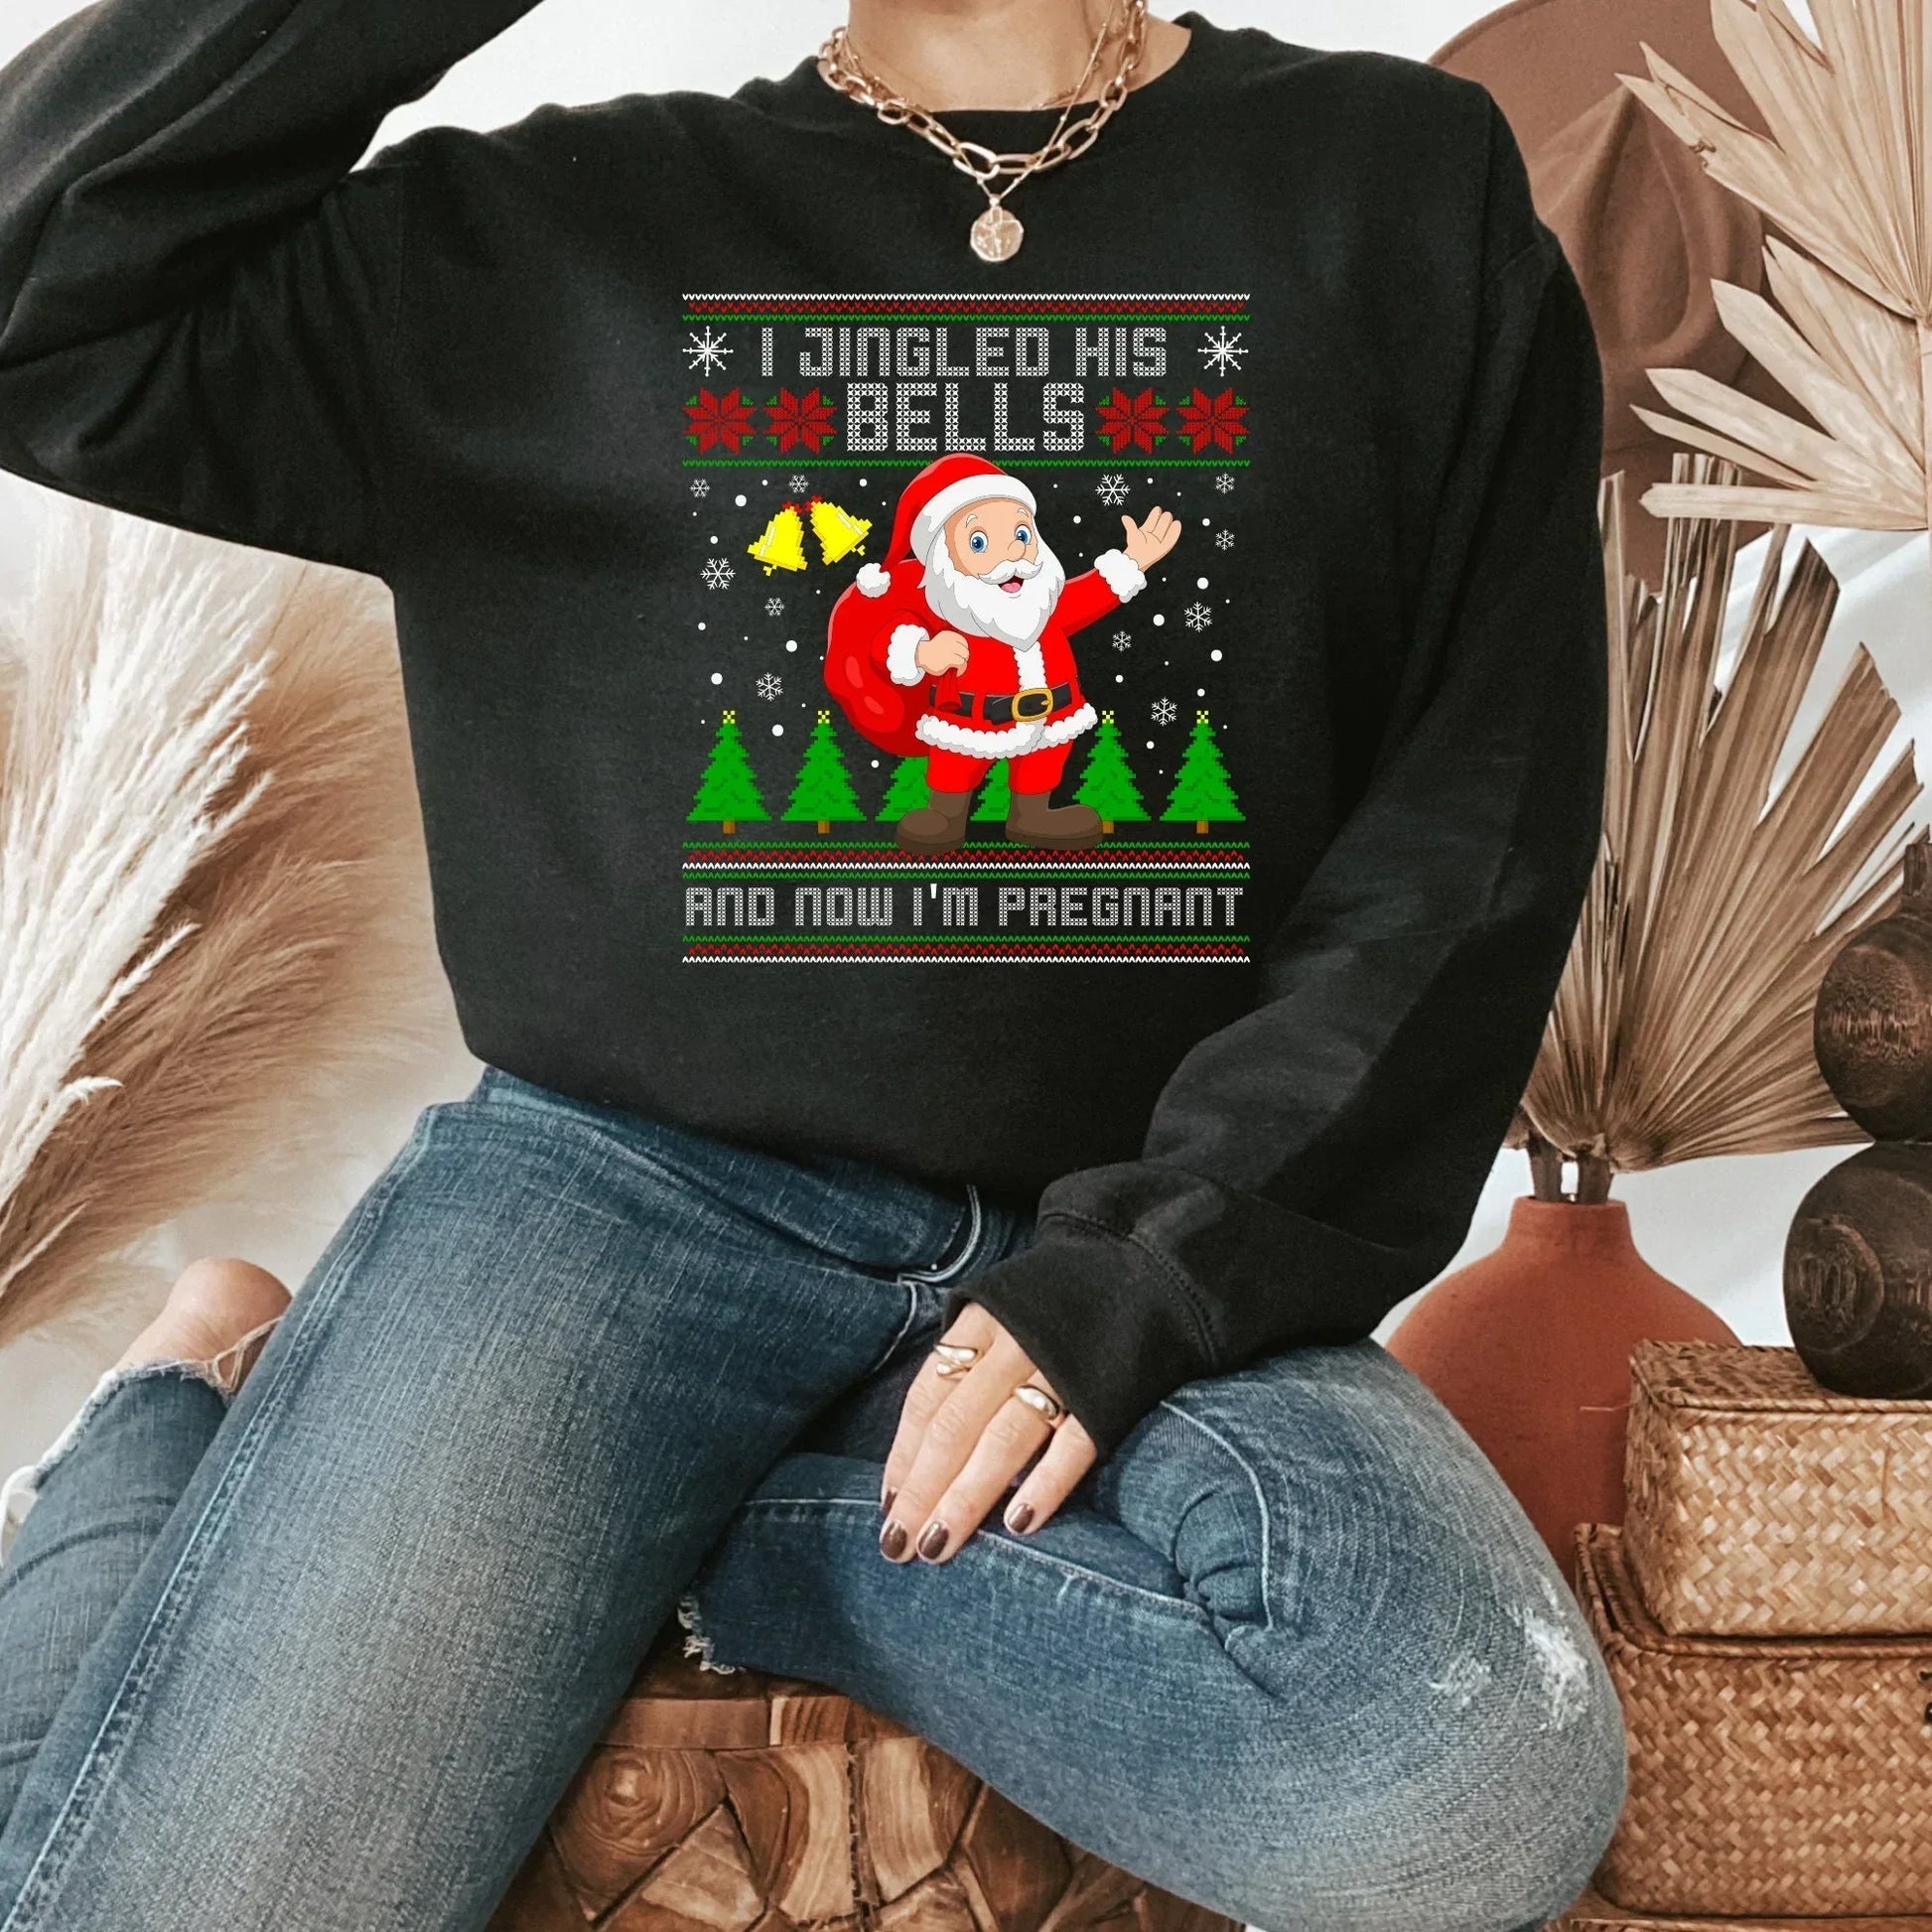 Retro Ugly Christmas Maternity Sweater, Pregnancy Reveal to Husband, Soon to Be Parents, Expecting Mother, New Baby Coming Soon Gift for Mom